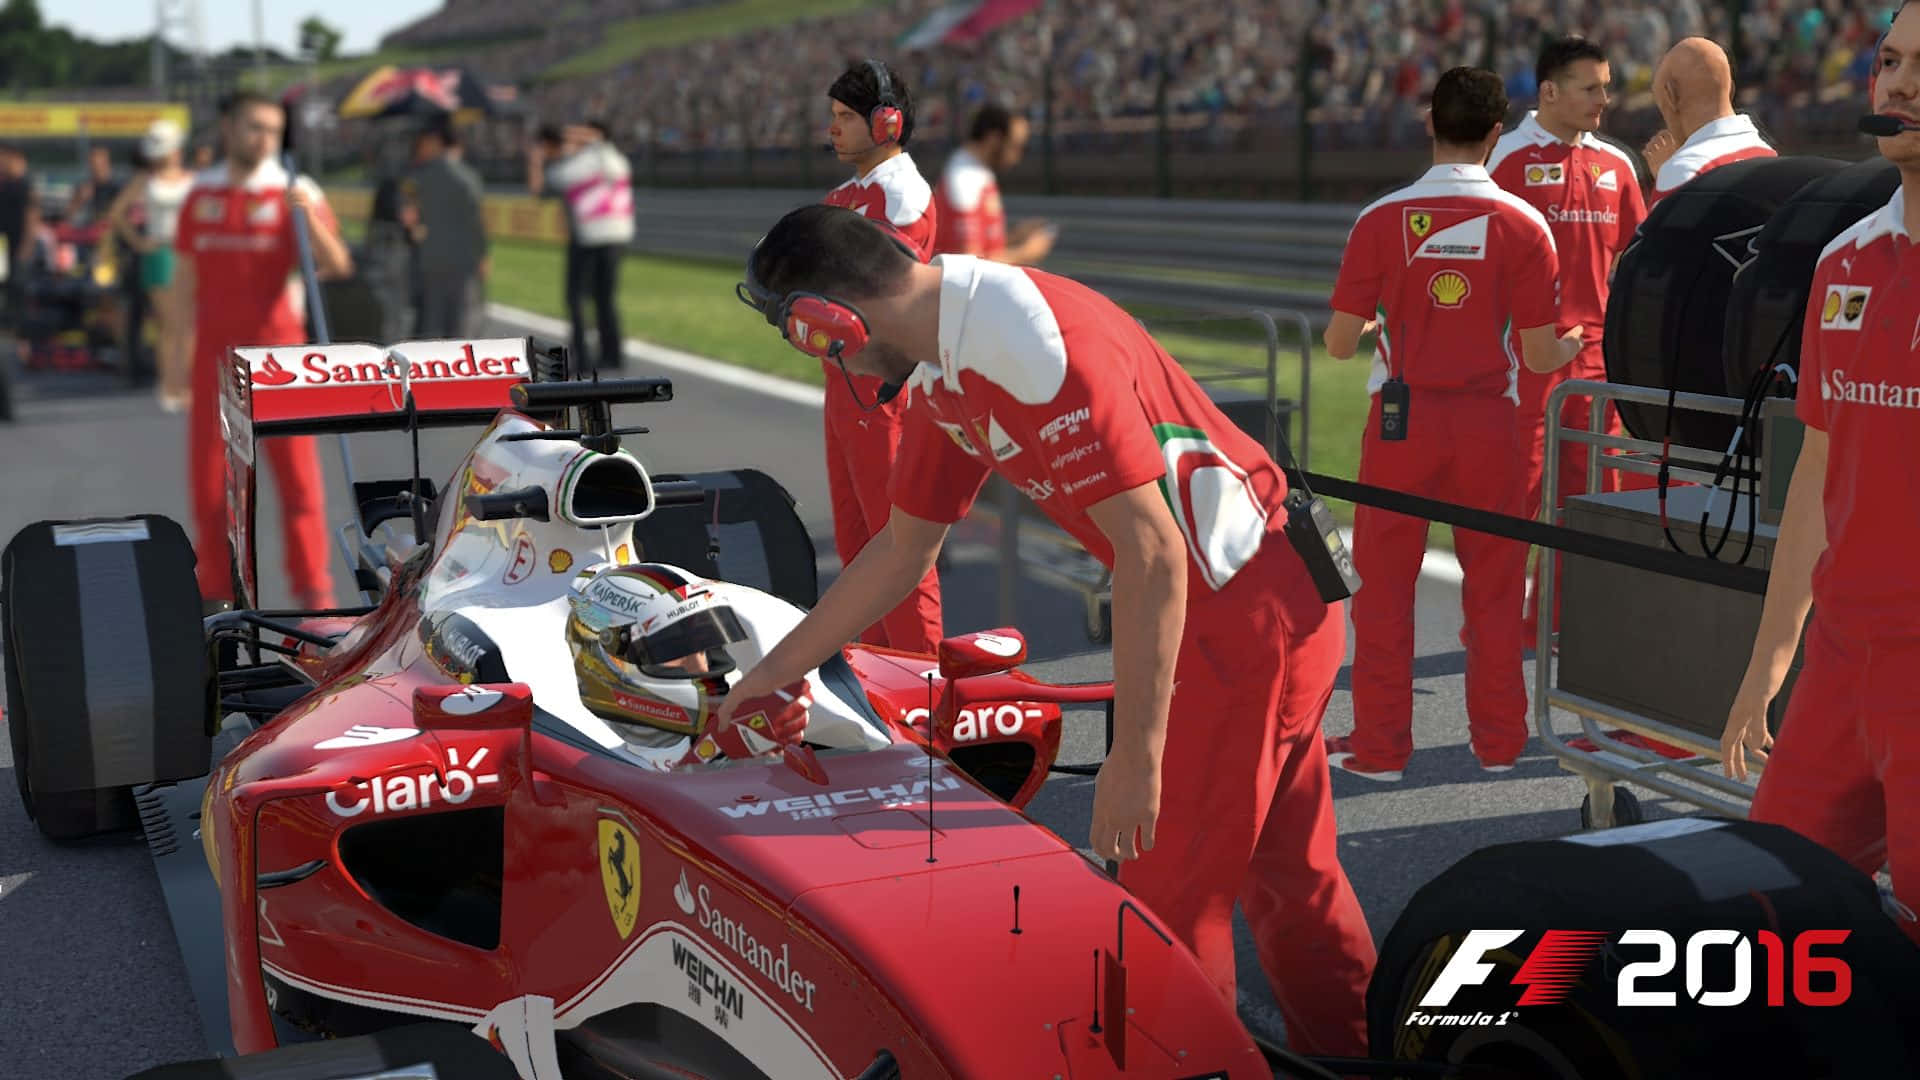 Get ready for the new F1 2016 season